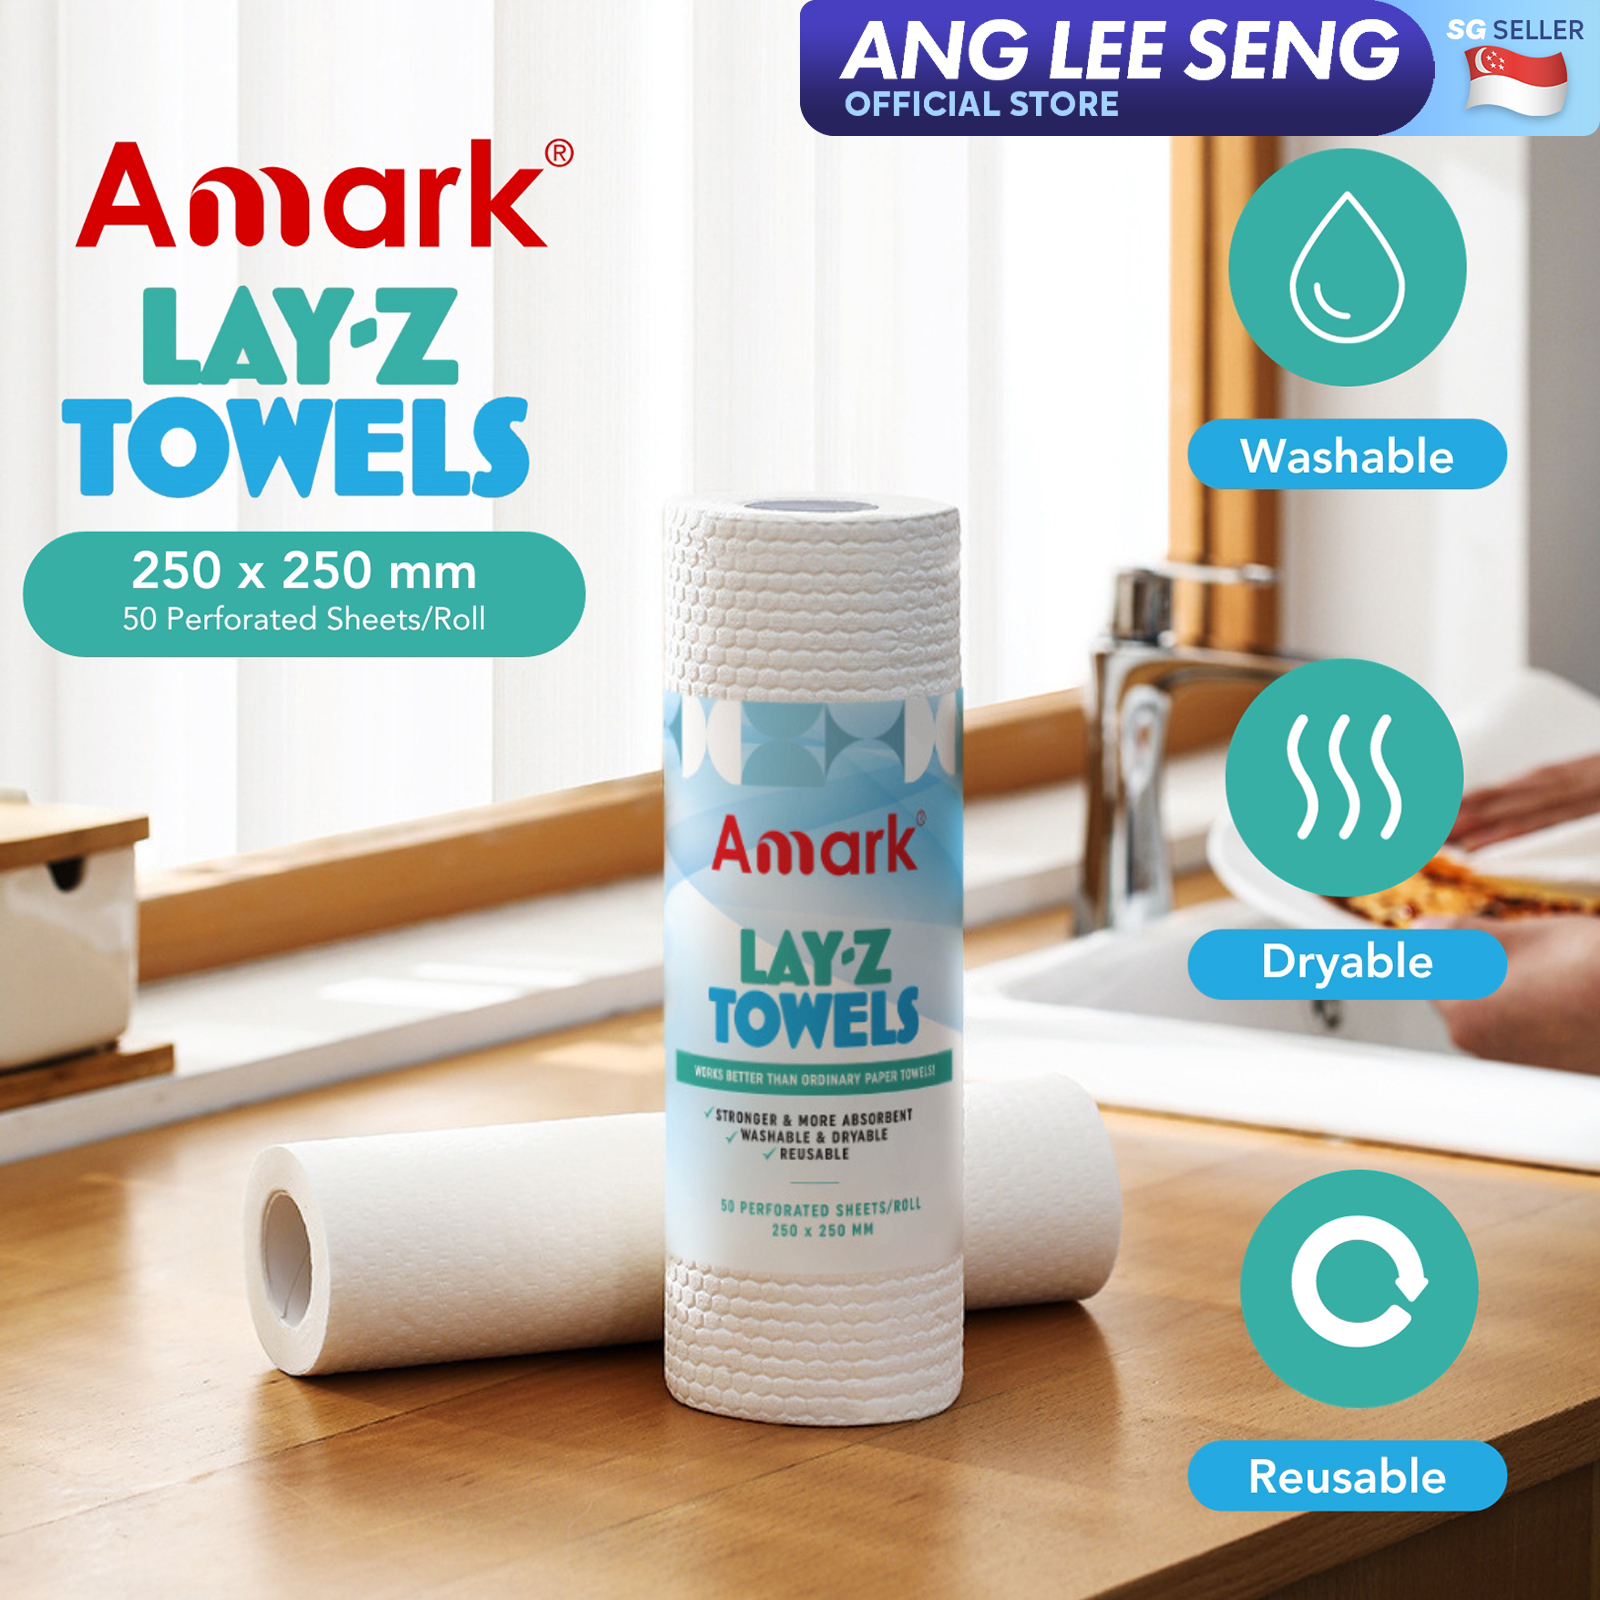 Amark Lay-Z Reusable & Washable Kitchen Towels 250 x 250mm - 50 Perforated Sheets/Roll